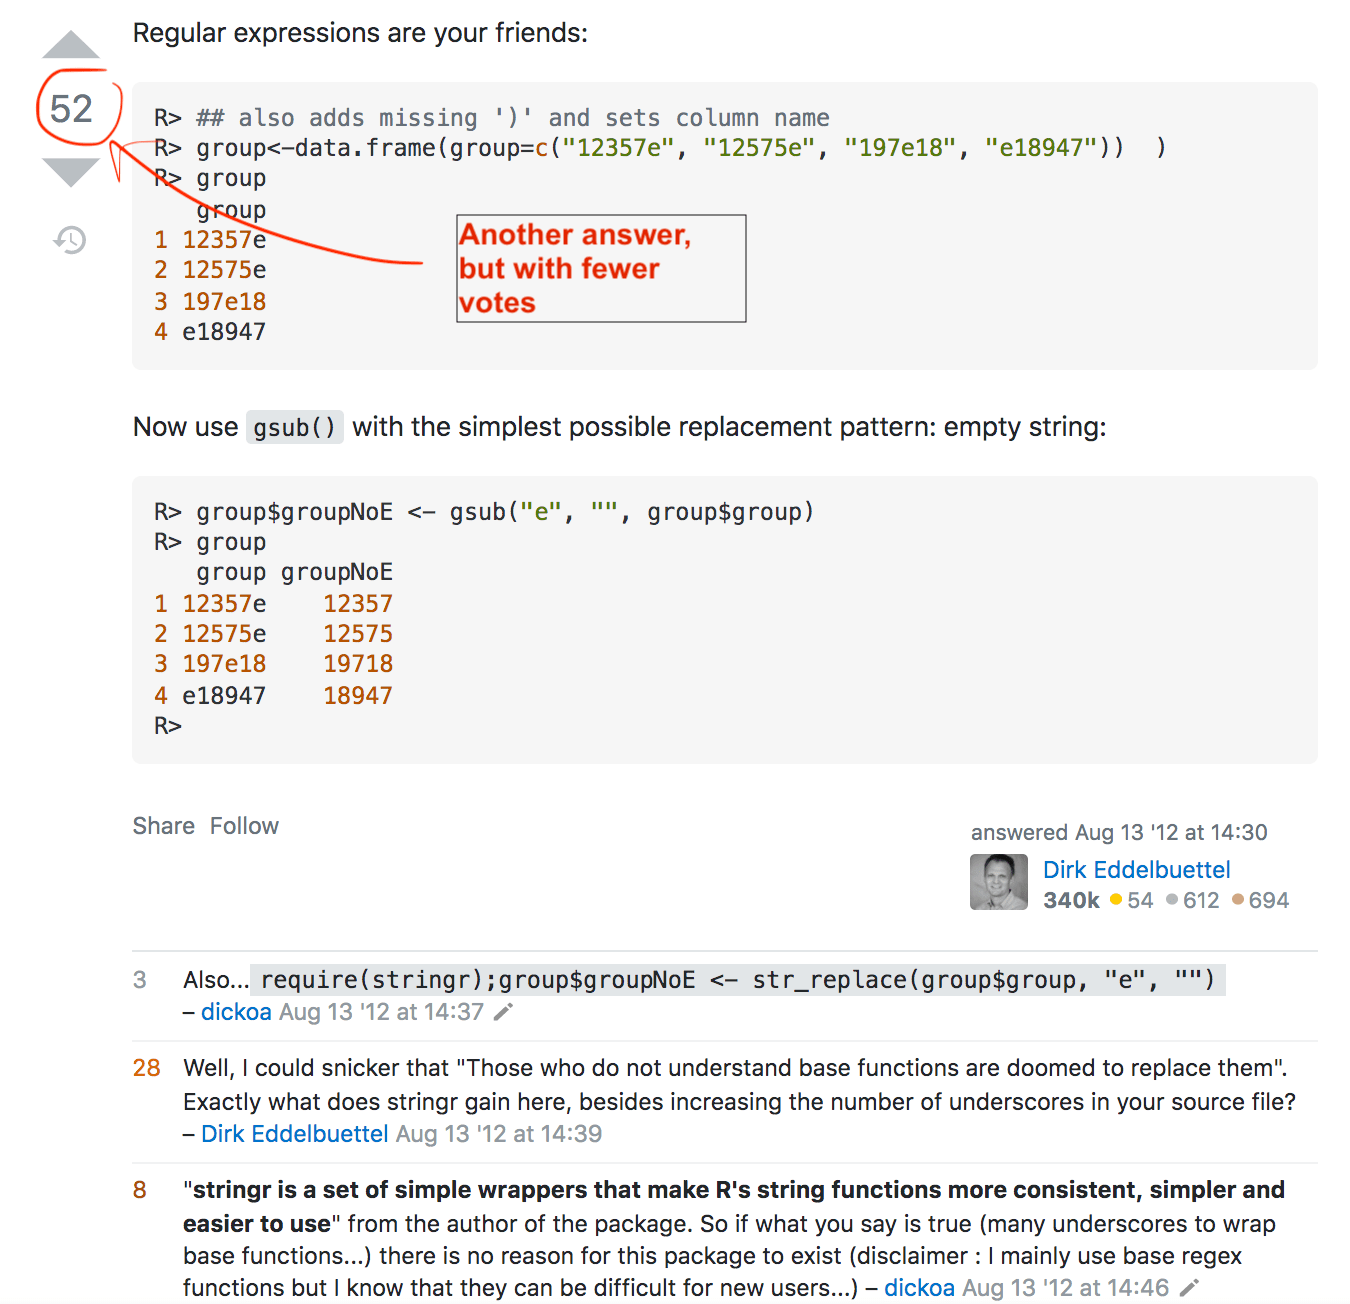 The second answer to the StackOverflow post, showing that it has fewer votes but provides another point of view on the topic.